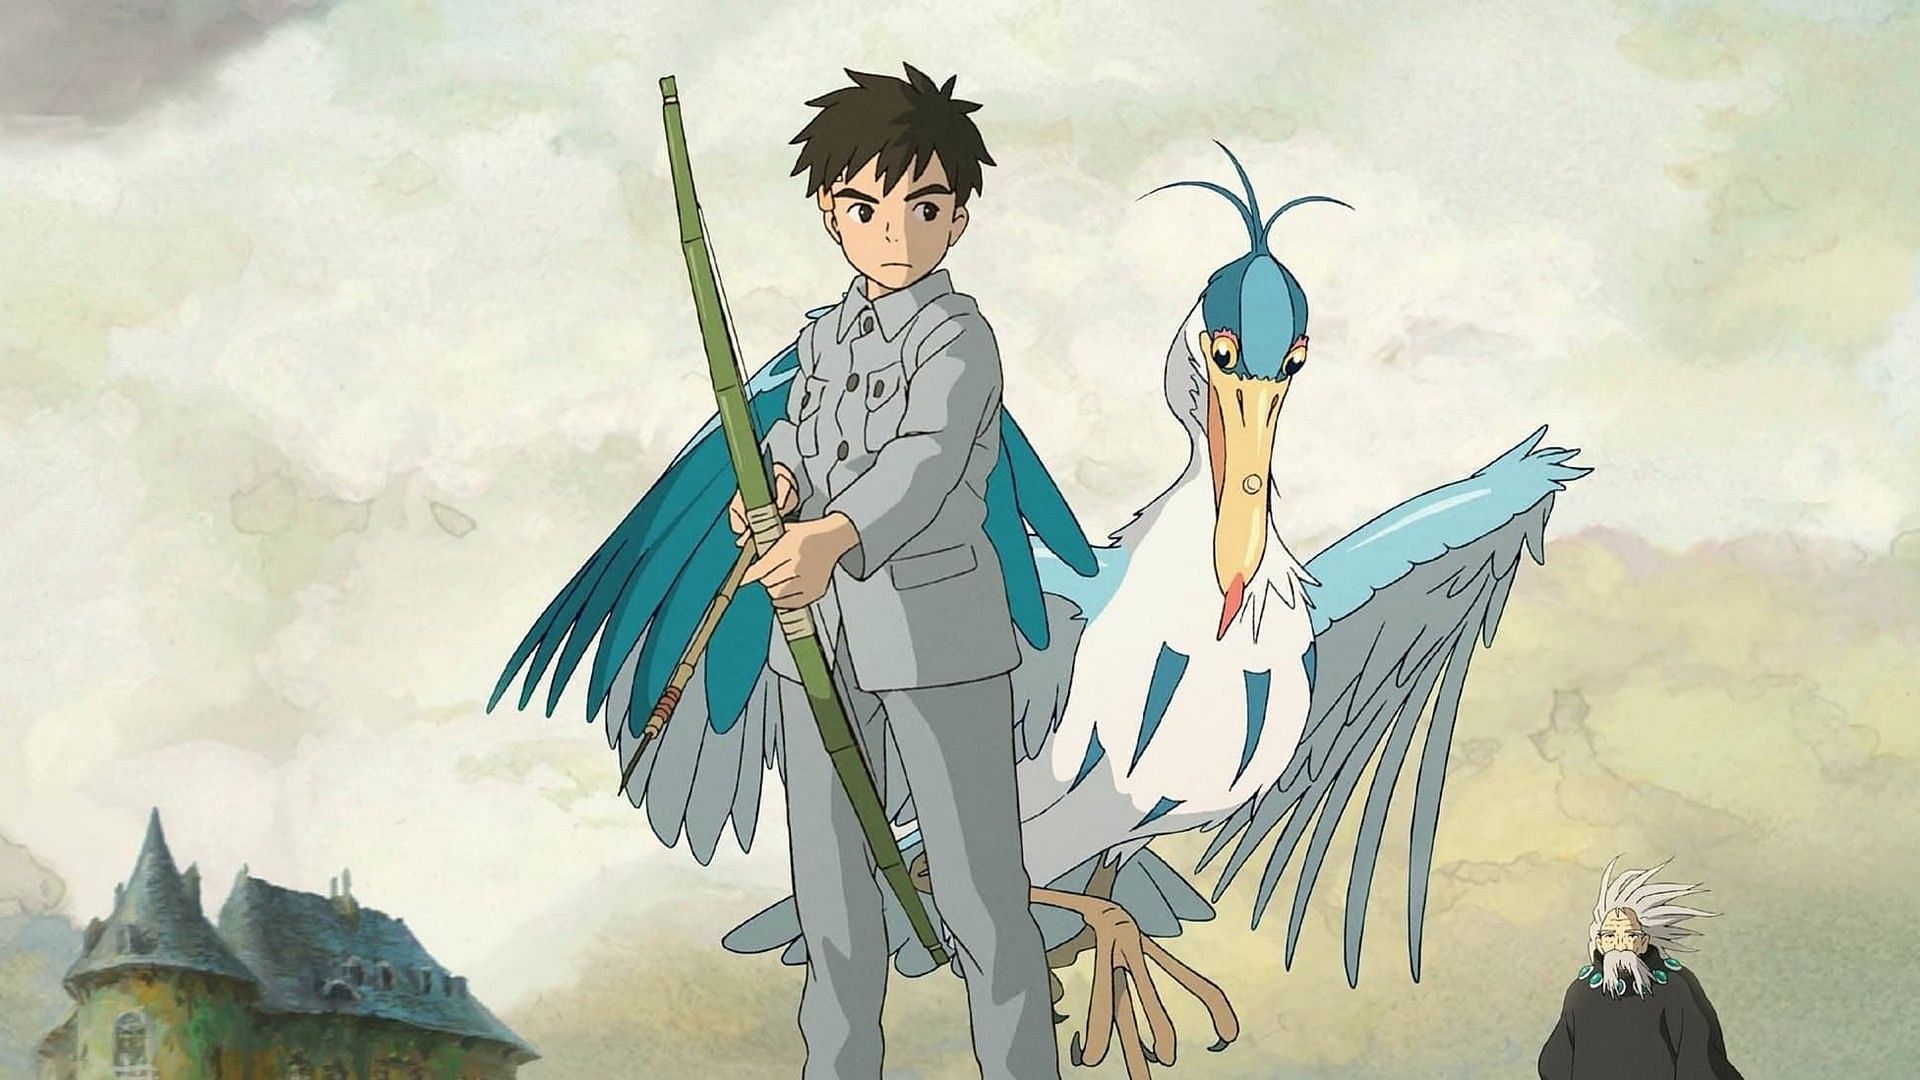 The Boy and the Heron becomes 3rd highest-earning anime film in North America (Image via Studio Ghibli)